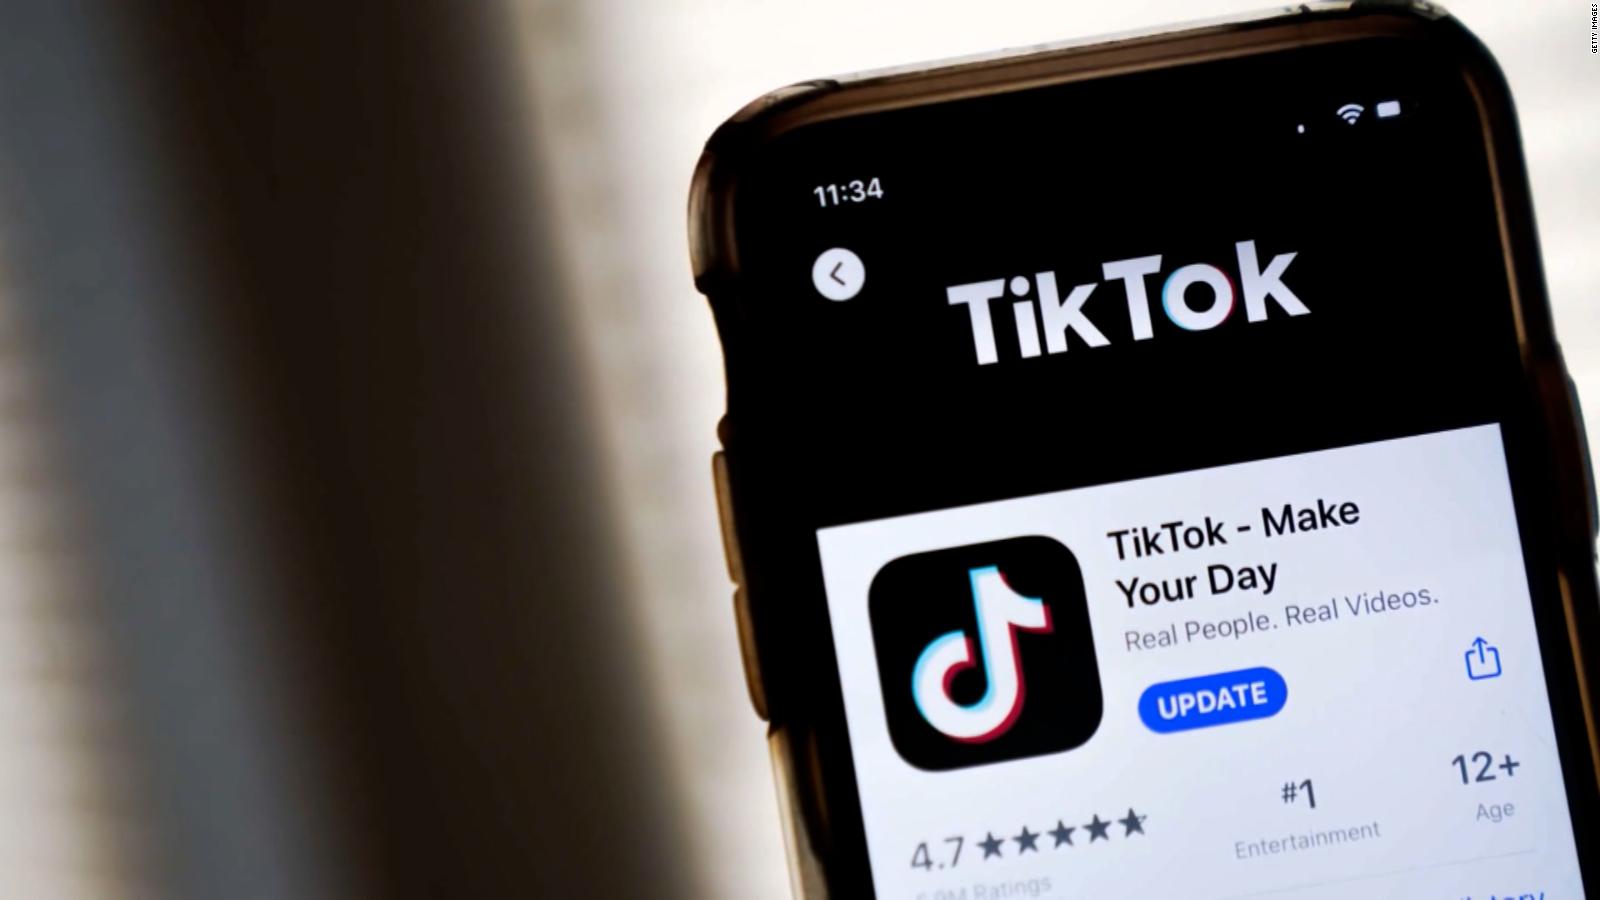 The UK bans TikTok on government devices